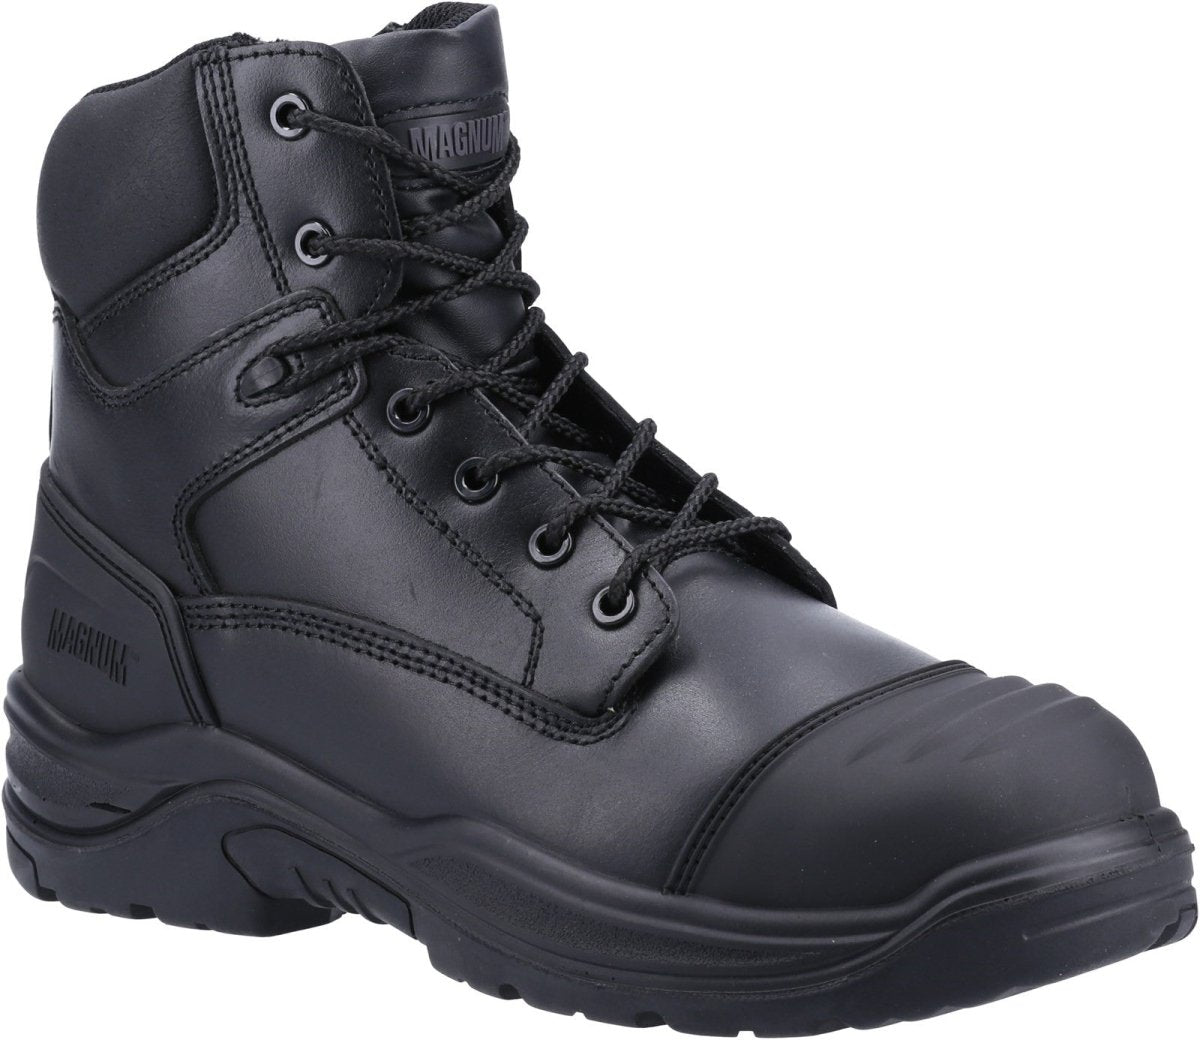 Magnum Roadmaster Composite Metatarsal Safety Boots - Shoe Store Direct